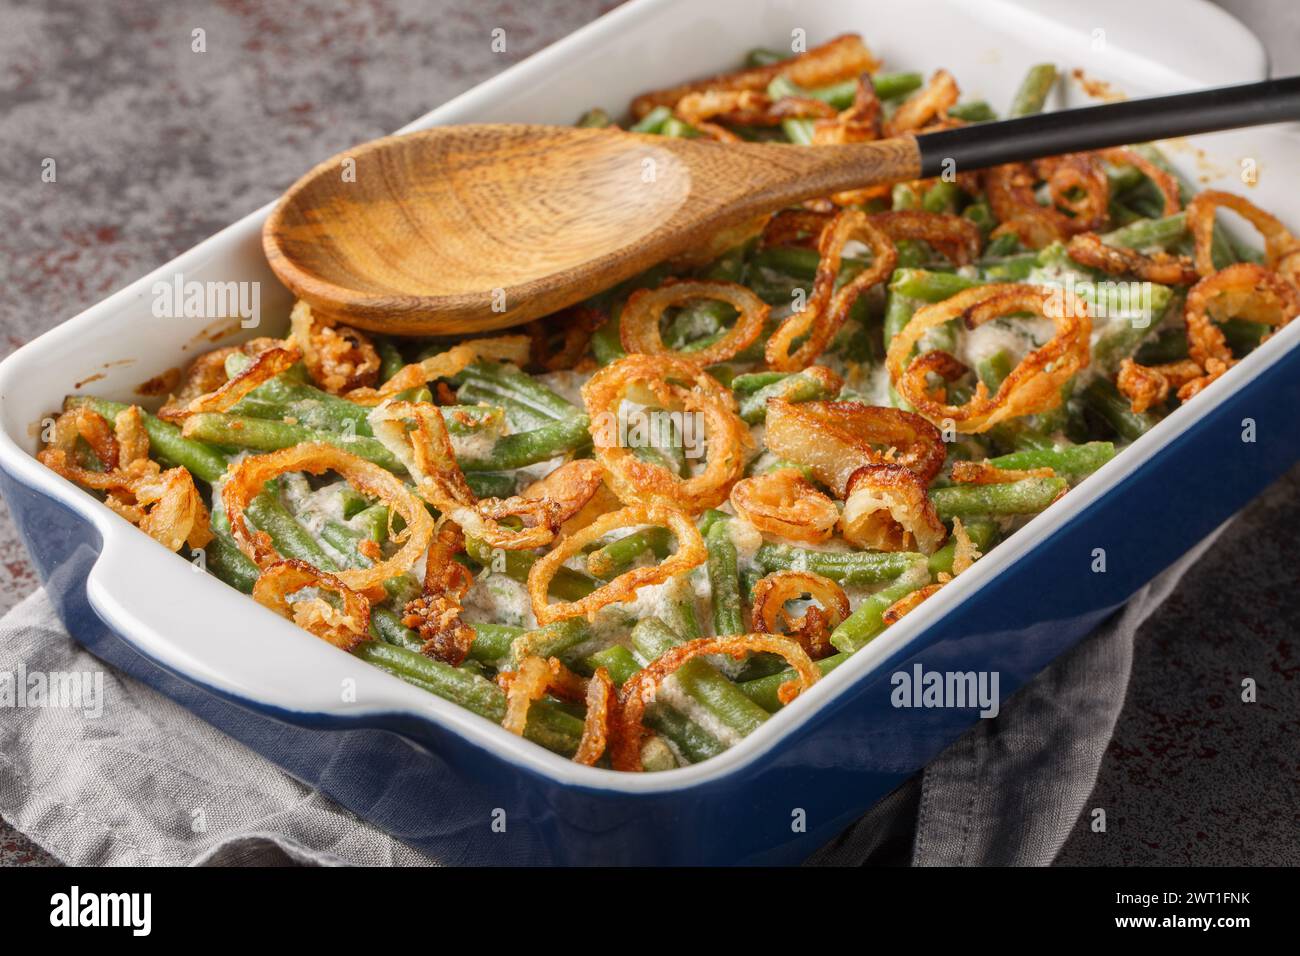 Delicious creamy Green Bean Casserole sprinkled with crispy fried onions on the baking dish on the table. Horizontal Stock Photo